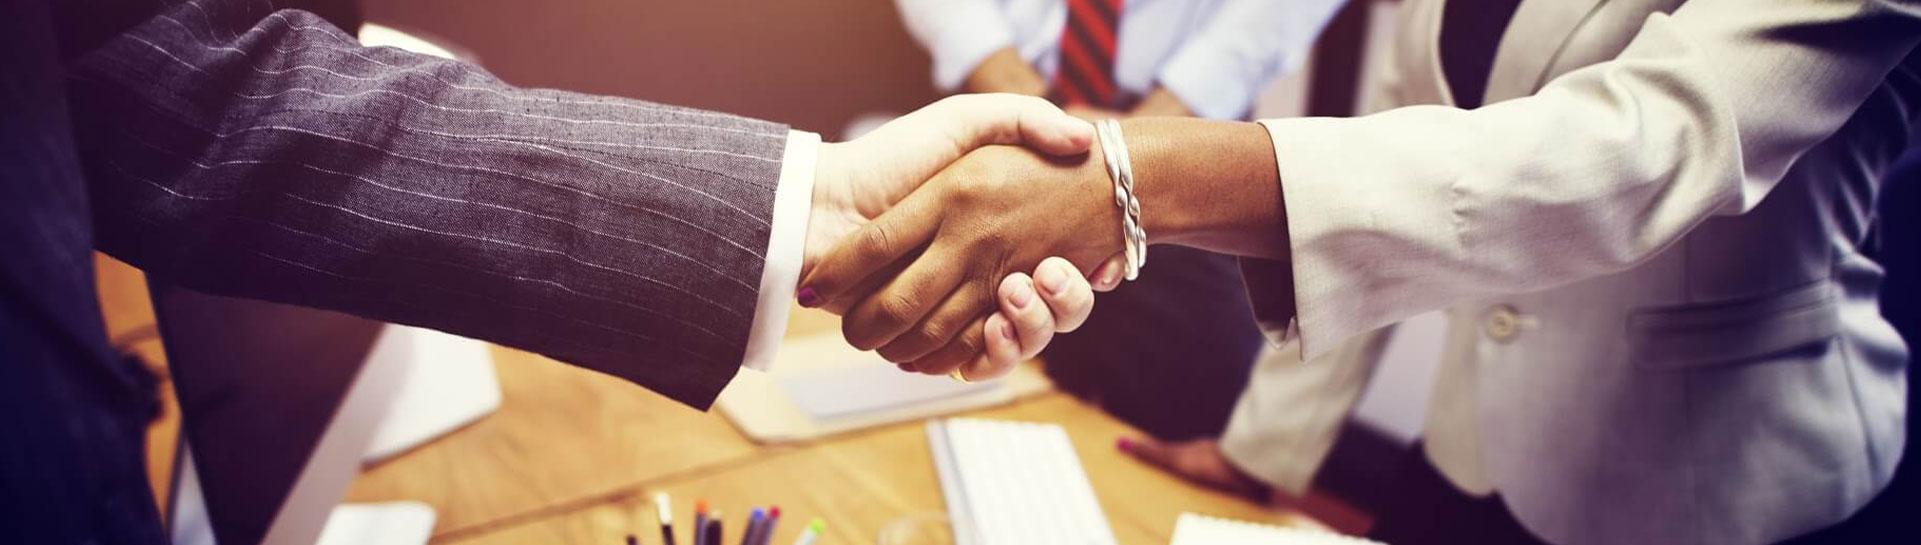 College Graduate Shaking Hands with Employer